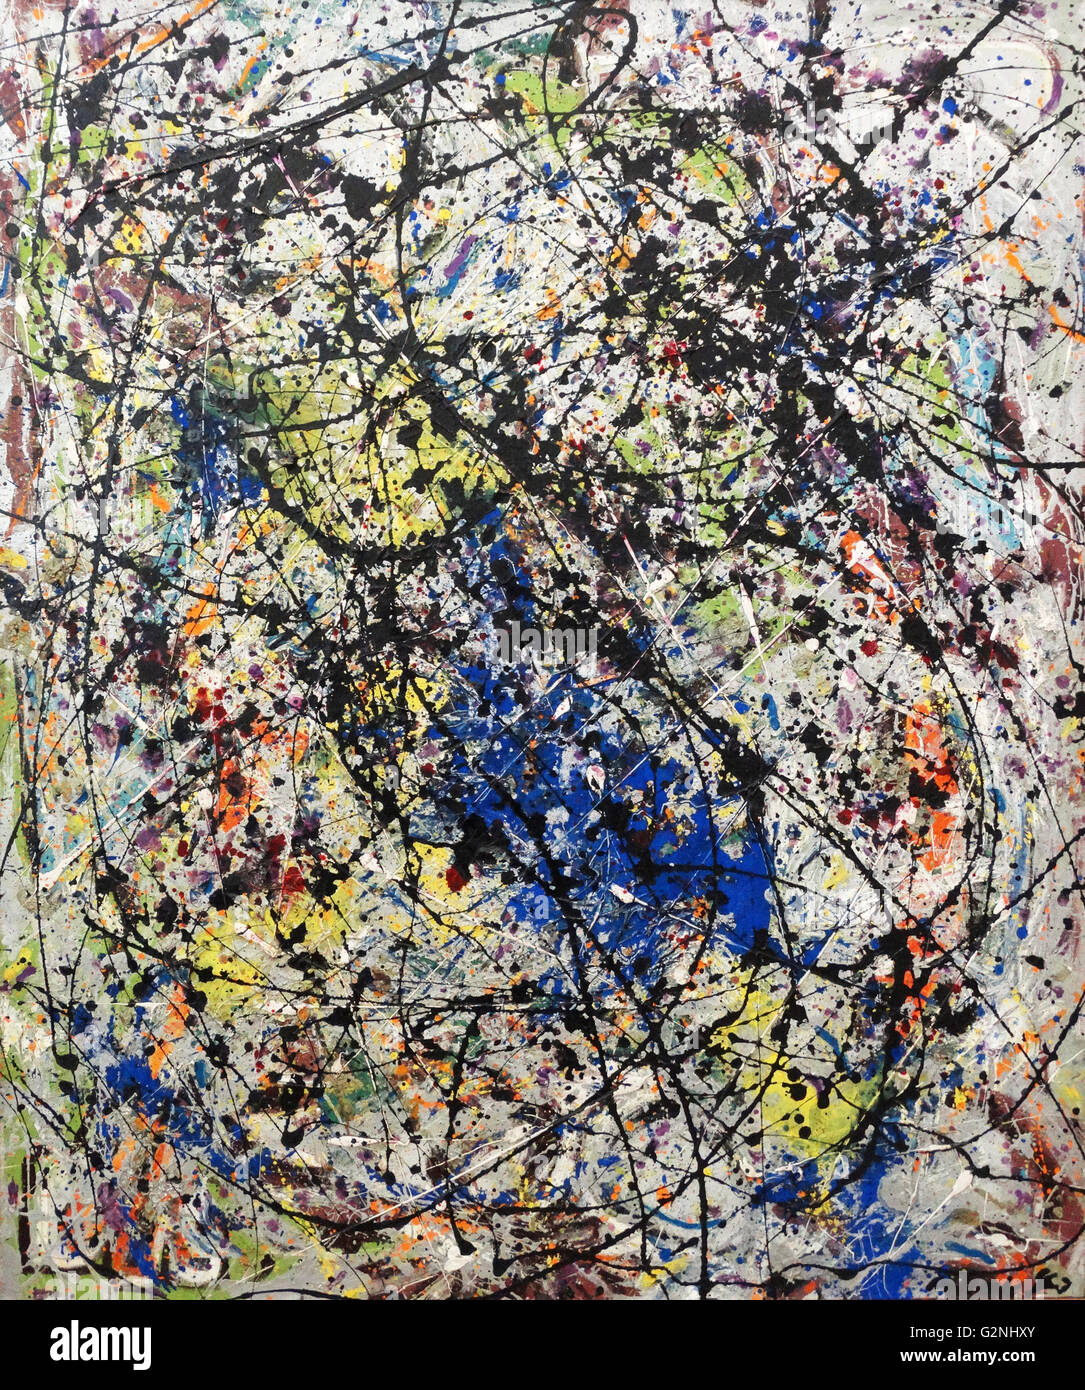 Reflection of the Big Dipper (paint on canvas) by Jackson Pollock (1912-1956) was an influential American painter with a major figure in the abstract expressionist movement. He was well known for his unique style of drip painting. Stock Photo